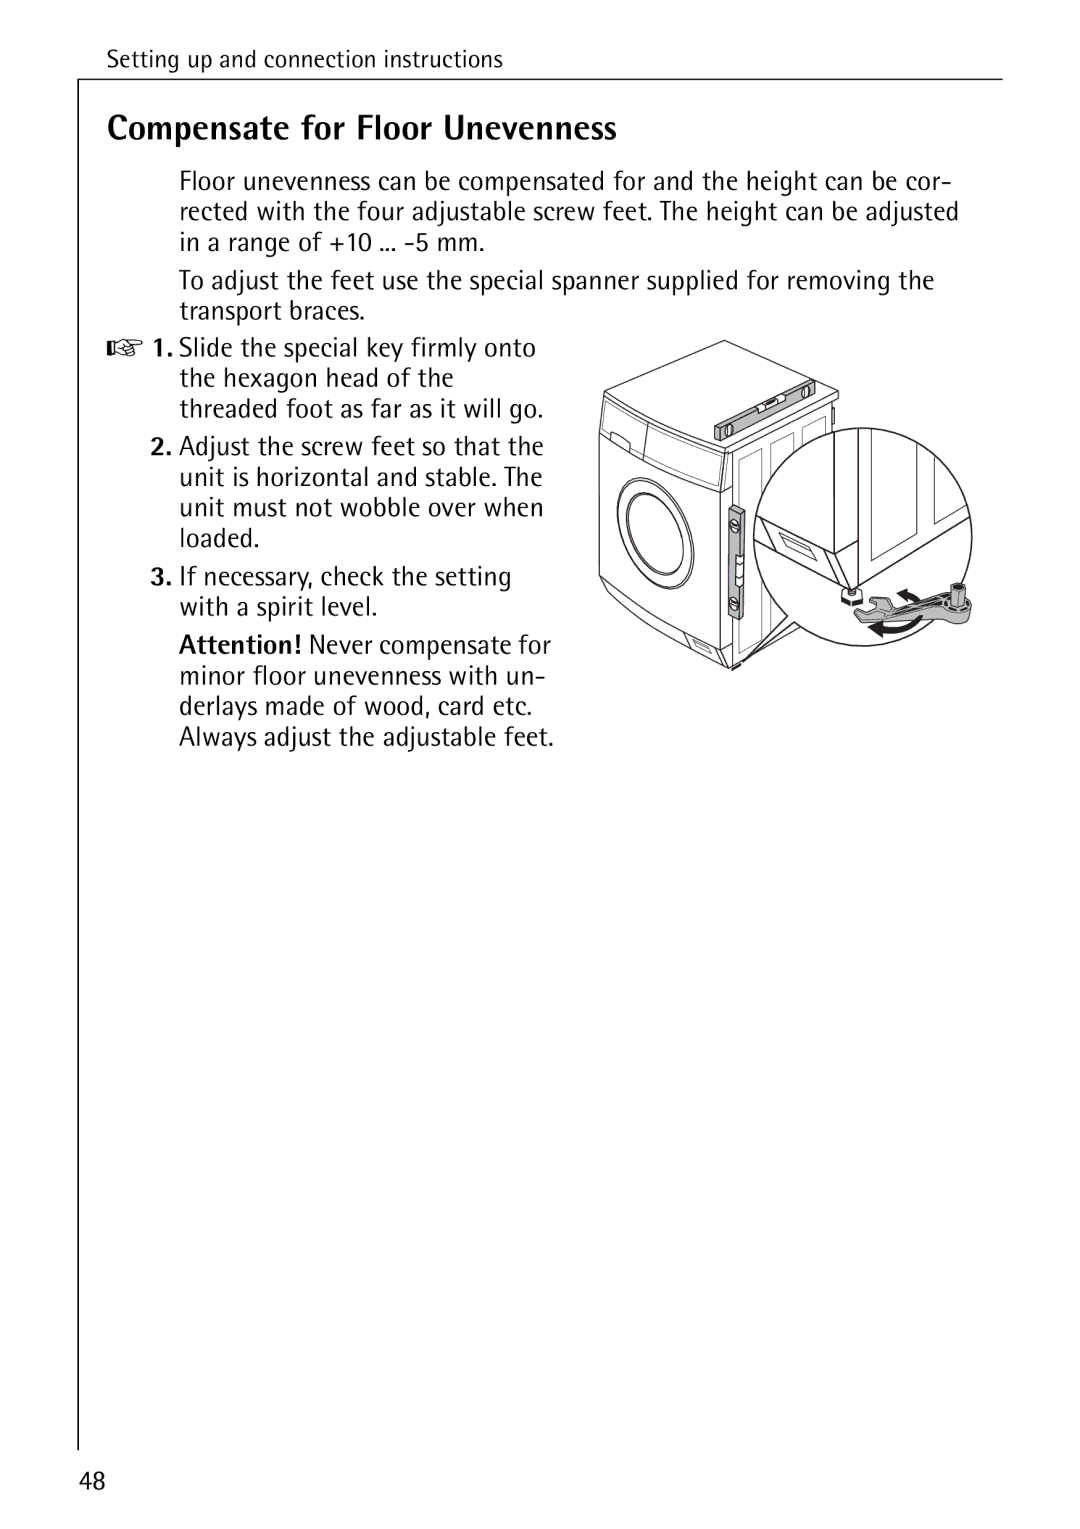 AEG 82730 manual Compensate for Floor Unevenness 